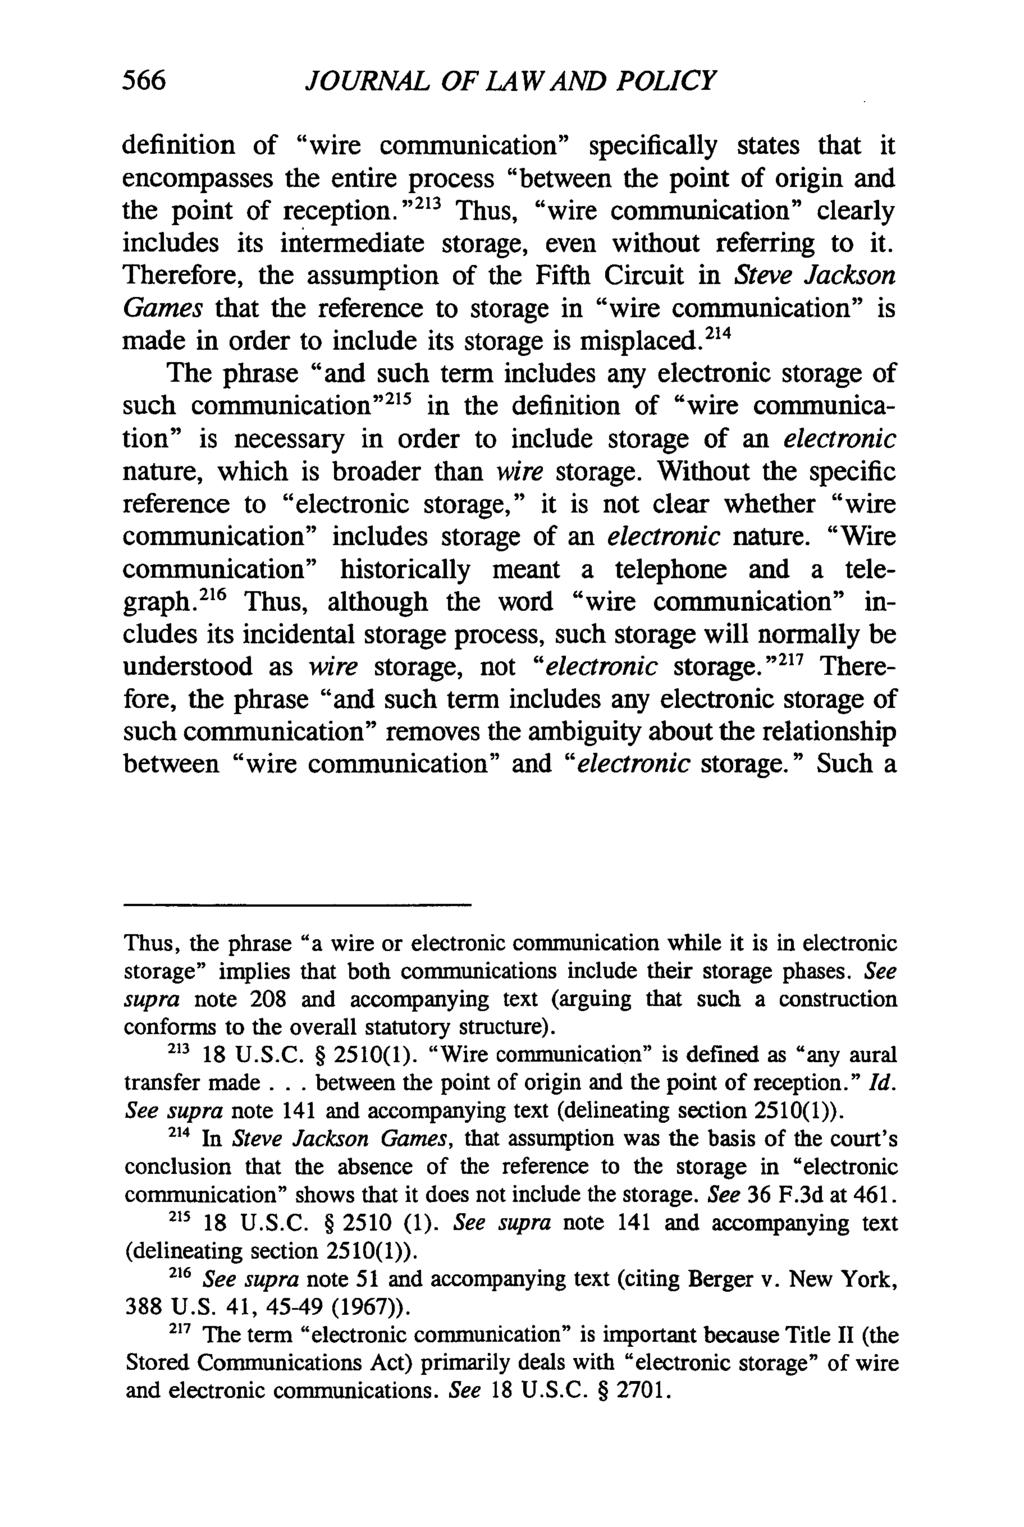 566 JOURNAL OF LAW AND POLICY definition of "wire communication" specifically states that it encompasses the entire process "between the point of origin and the point of reception.